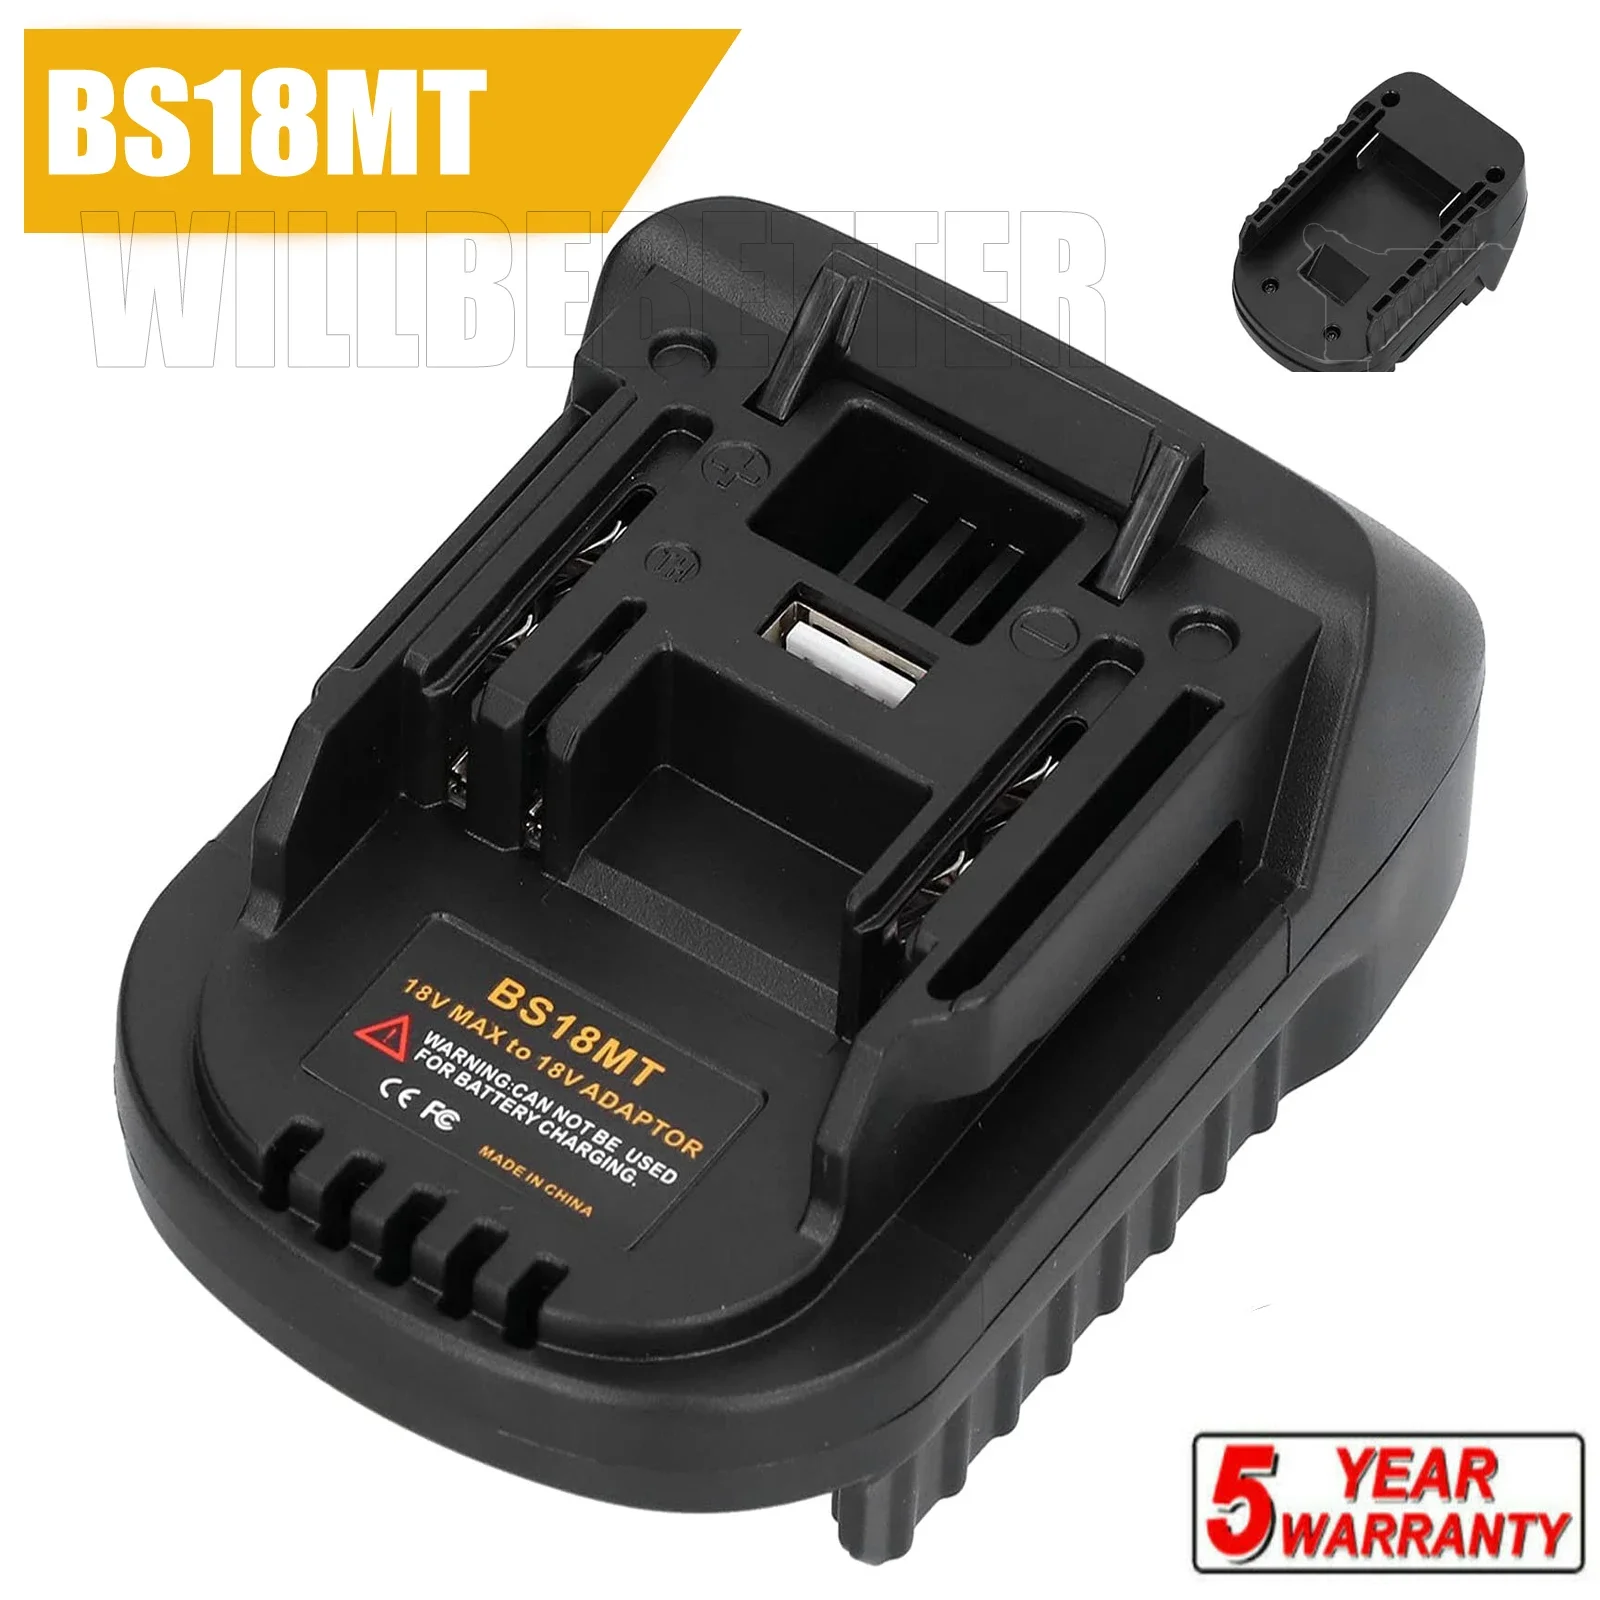 BS18MT Battery Adapter Converter USB For Bosch 18V BAT619G/620 Batteries Convert To For Makita 18V BL 1860 Lithium Battery 12pcs pkcell aa 2a 2600mah battery1 2v ni mh rechargeable battery aa batteries baterias bateria up to 1000 circel times